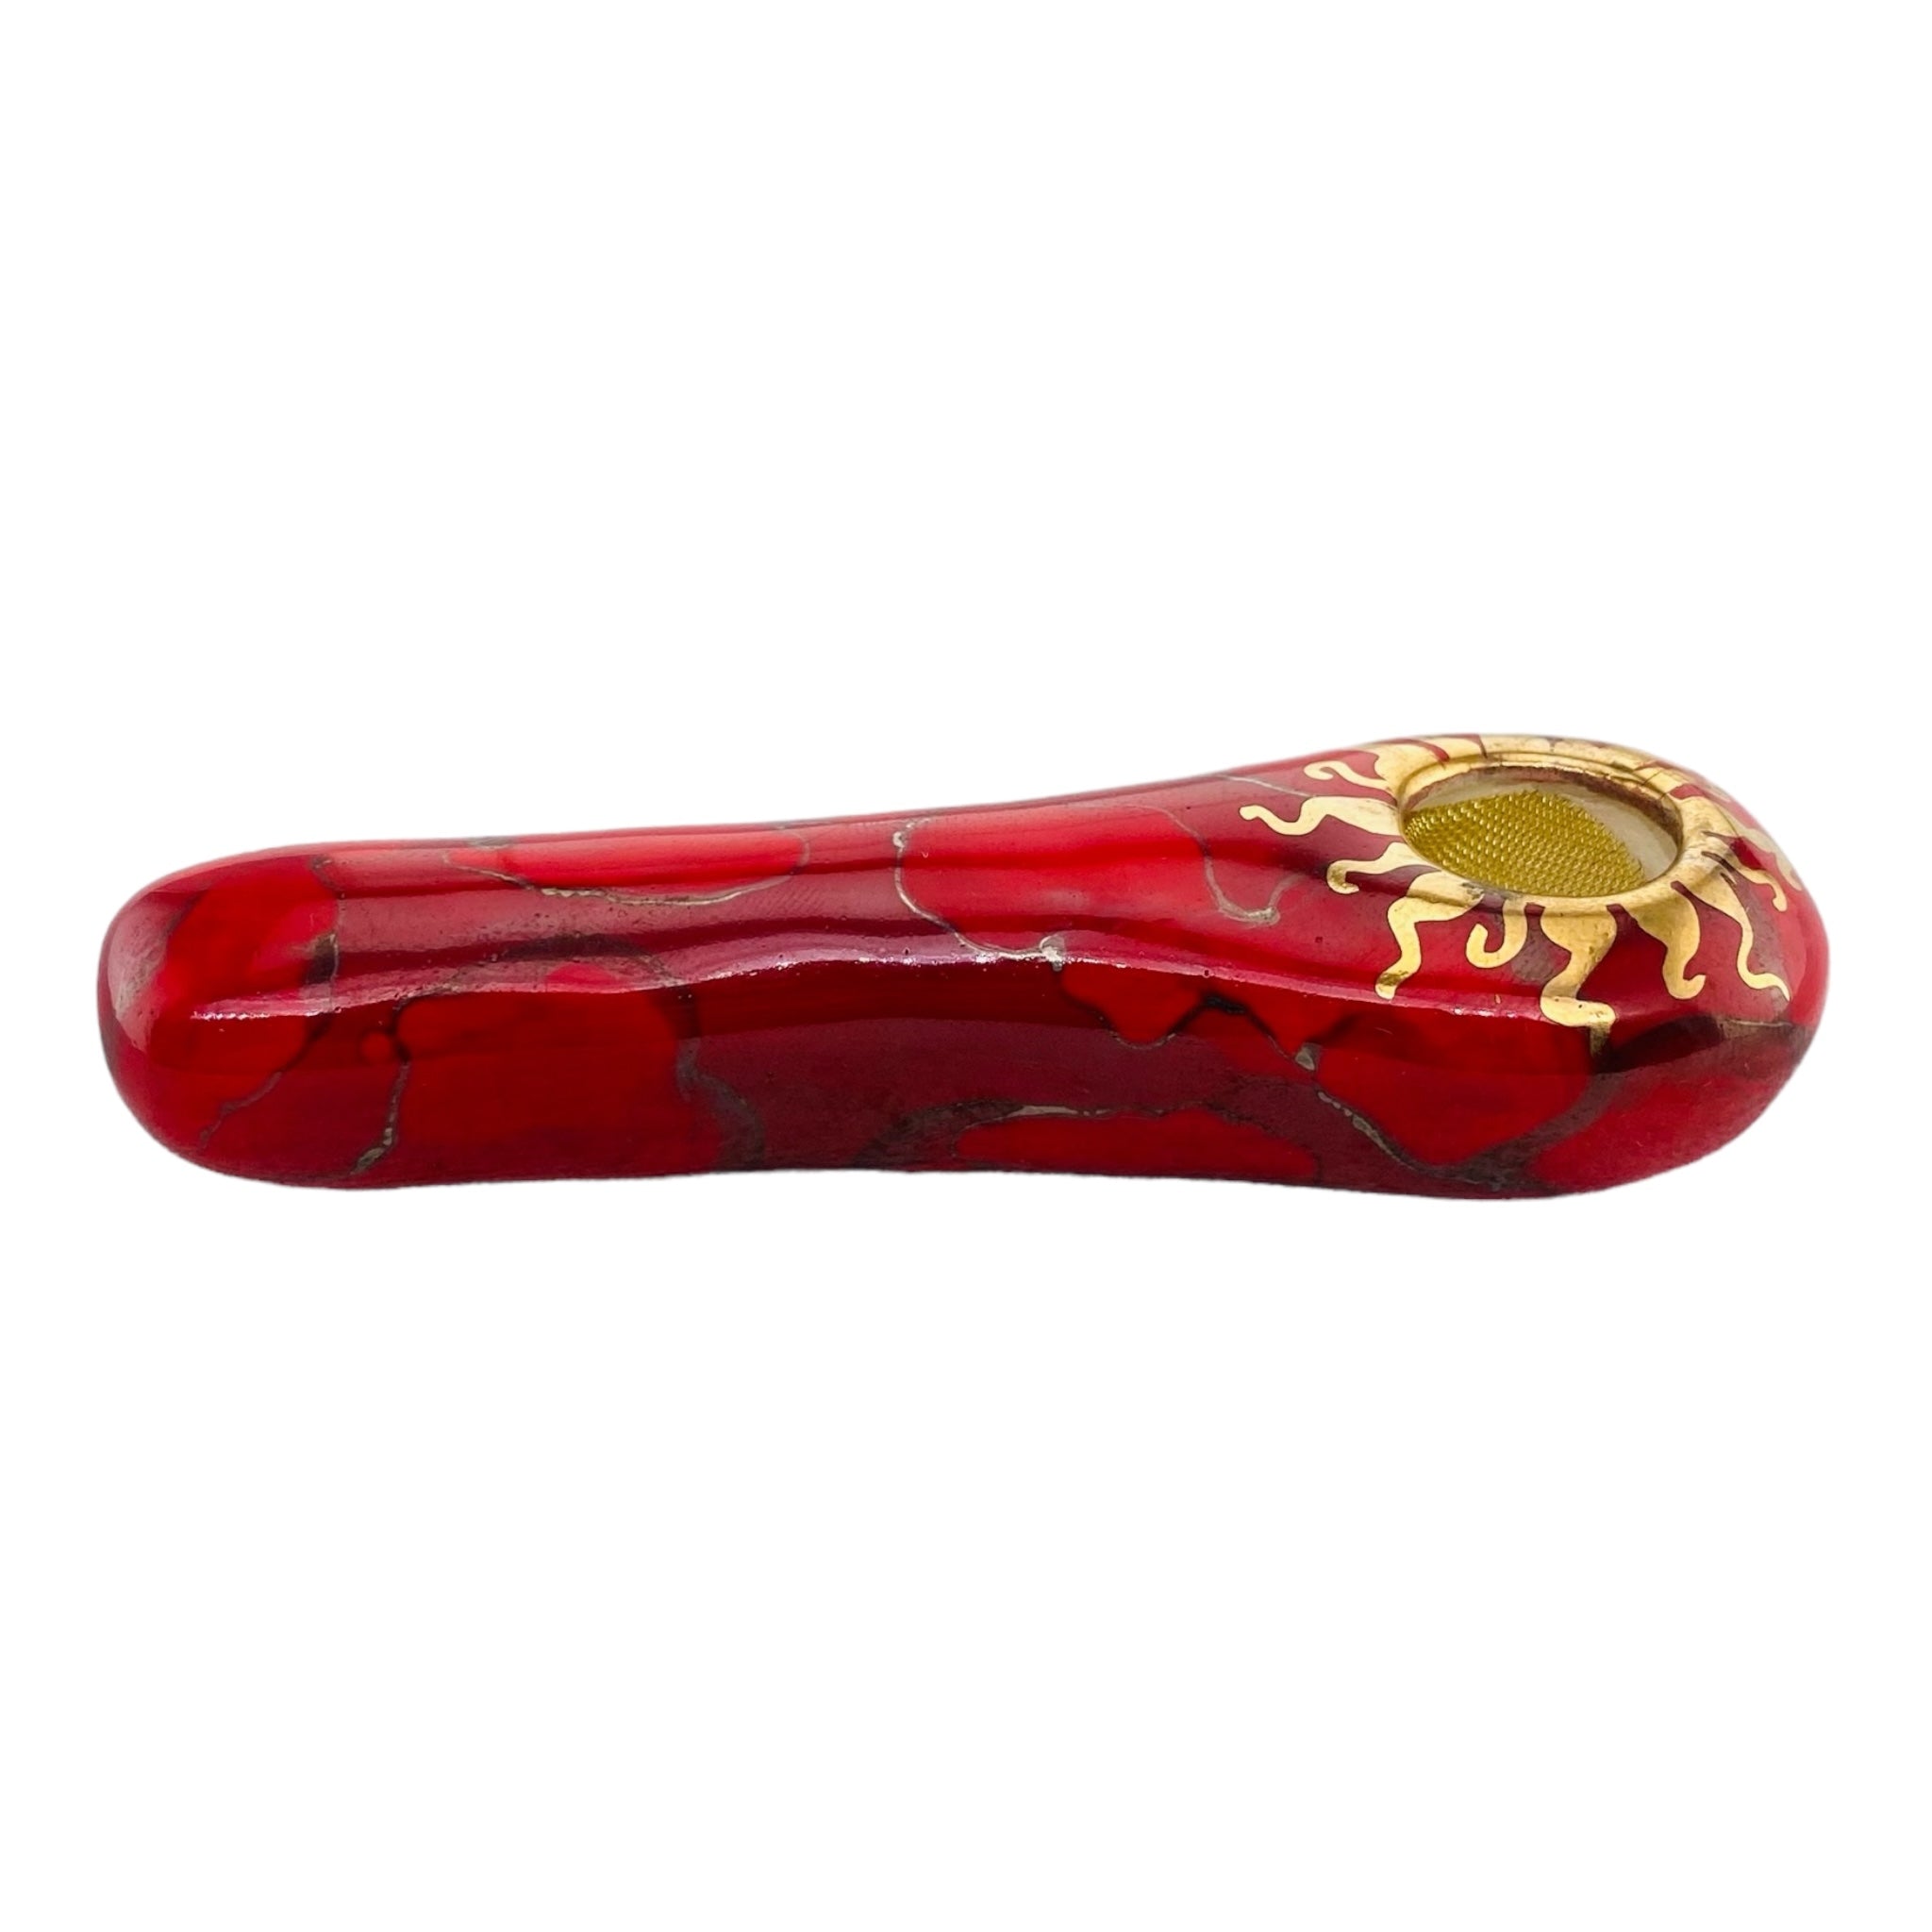 Red Ceramic Hand Pipe Basic Spoon with brass screen for sale